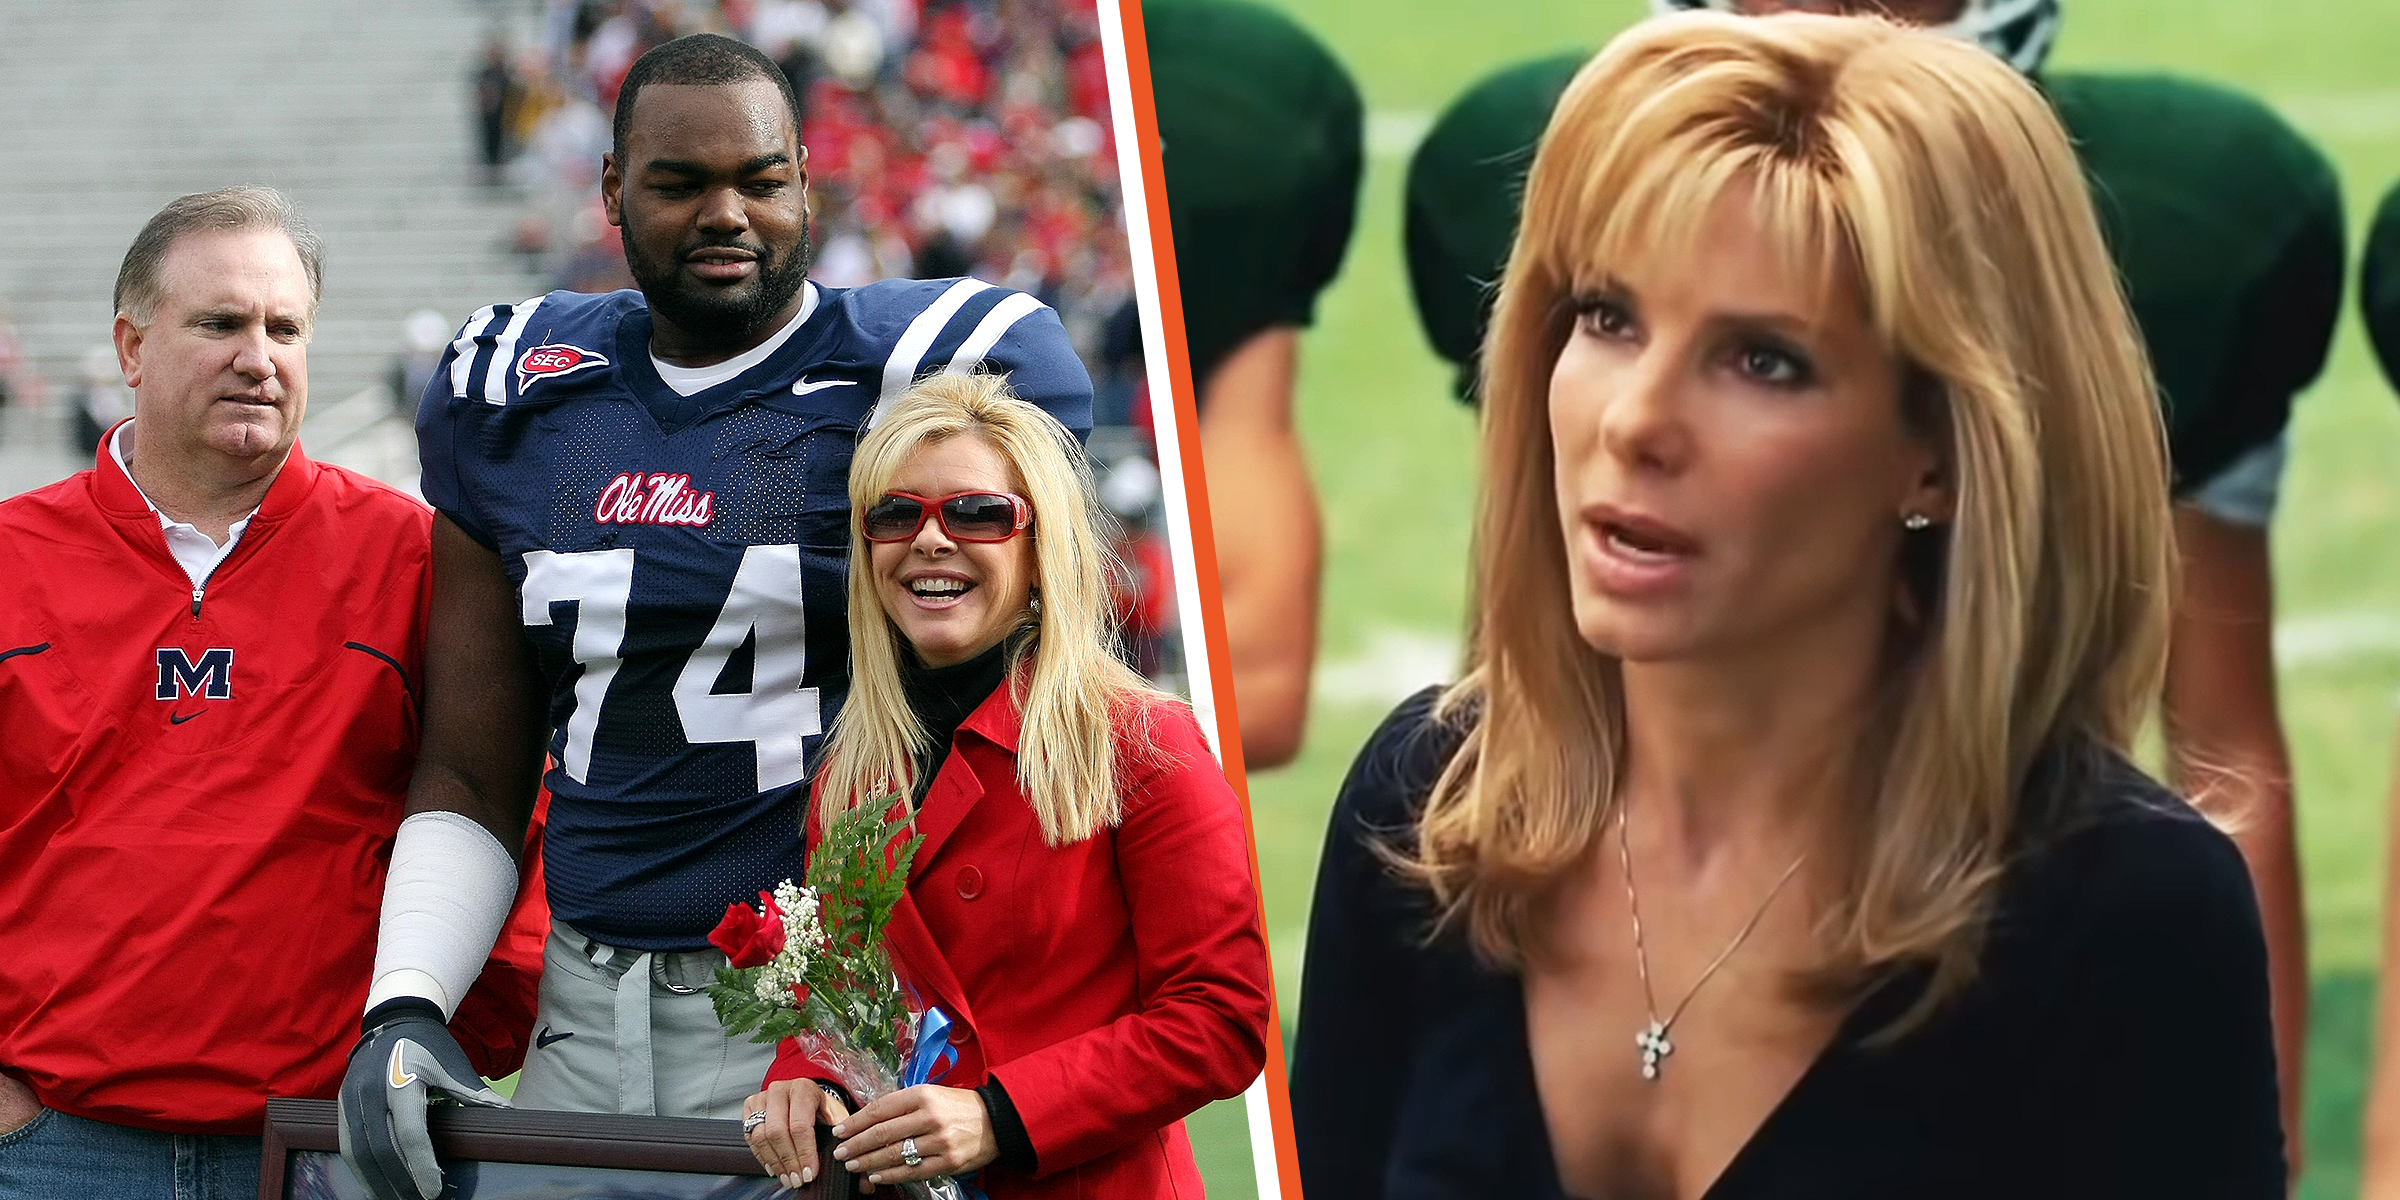 Sean Tuohy, Leigh Anne Tuohy and Michael Oher. | Source: Warner Bros. Pictures | Getty Images